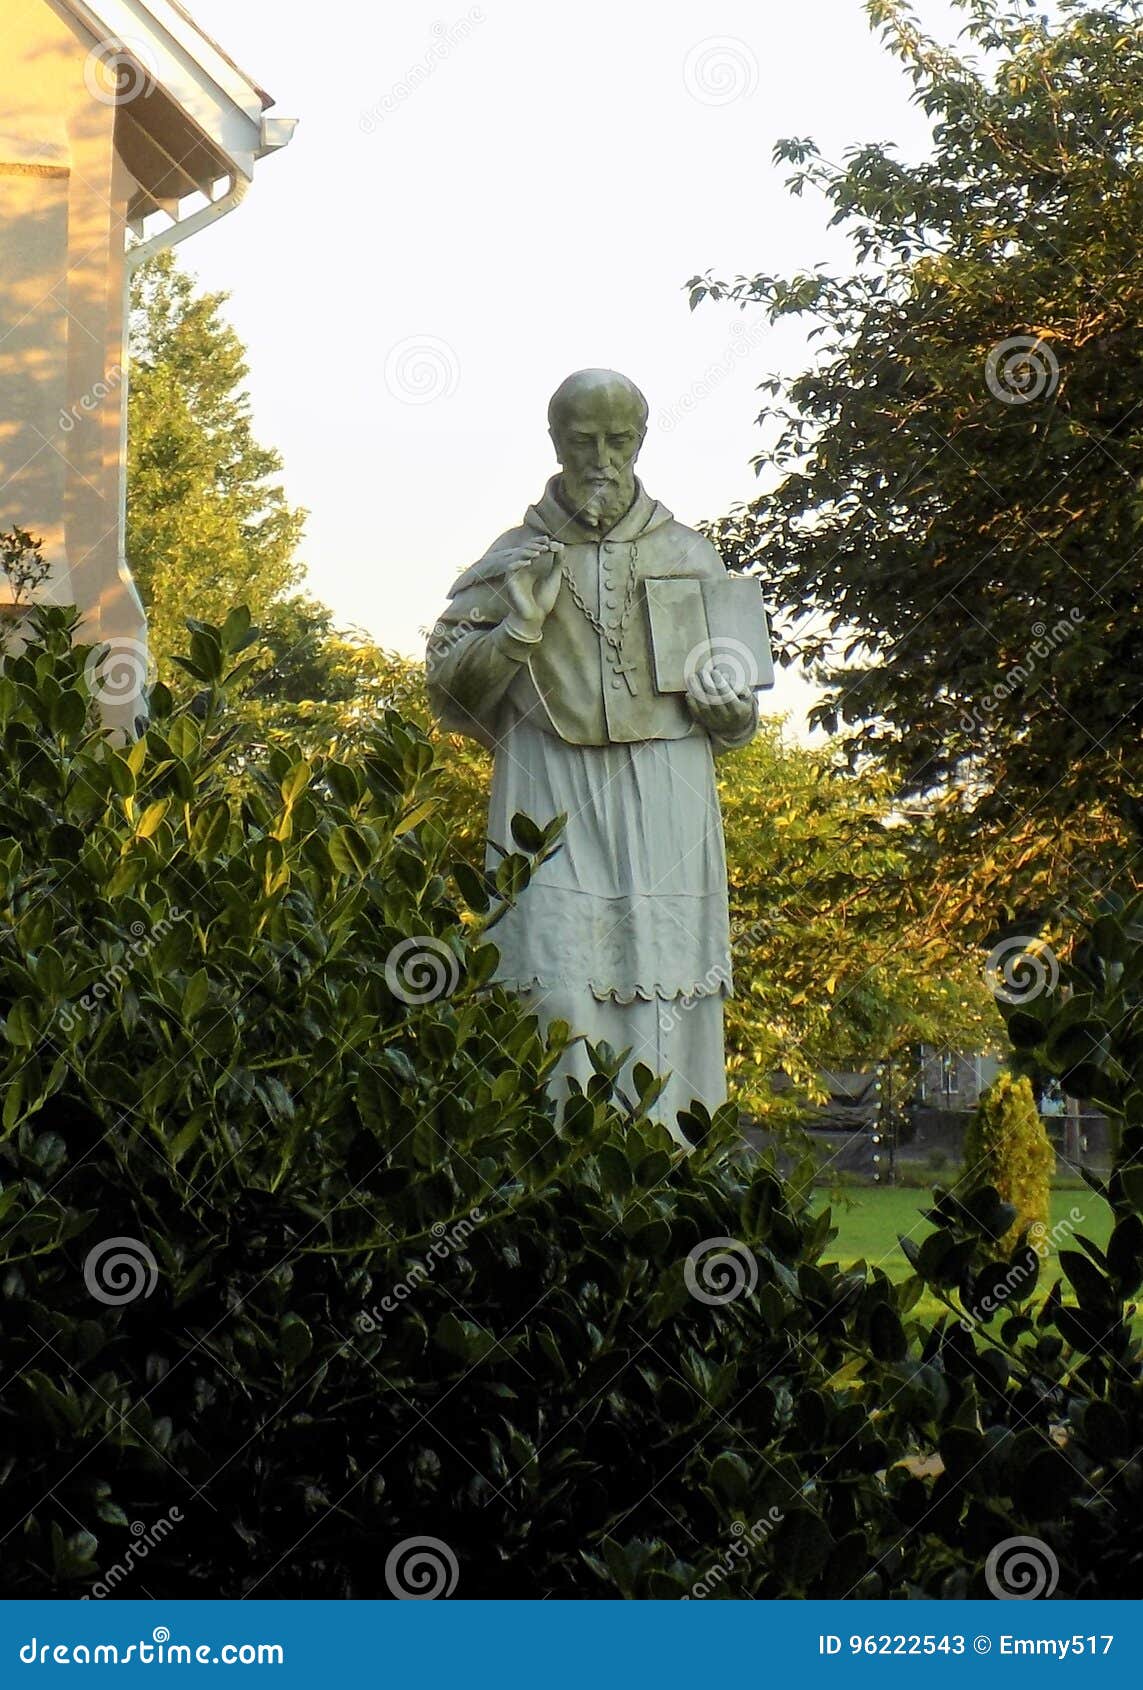 blessed statue of st. francis de sales in benedict